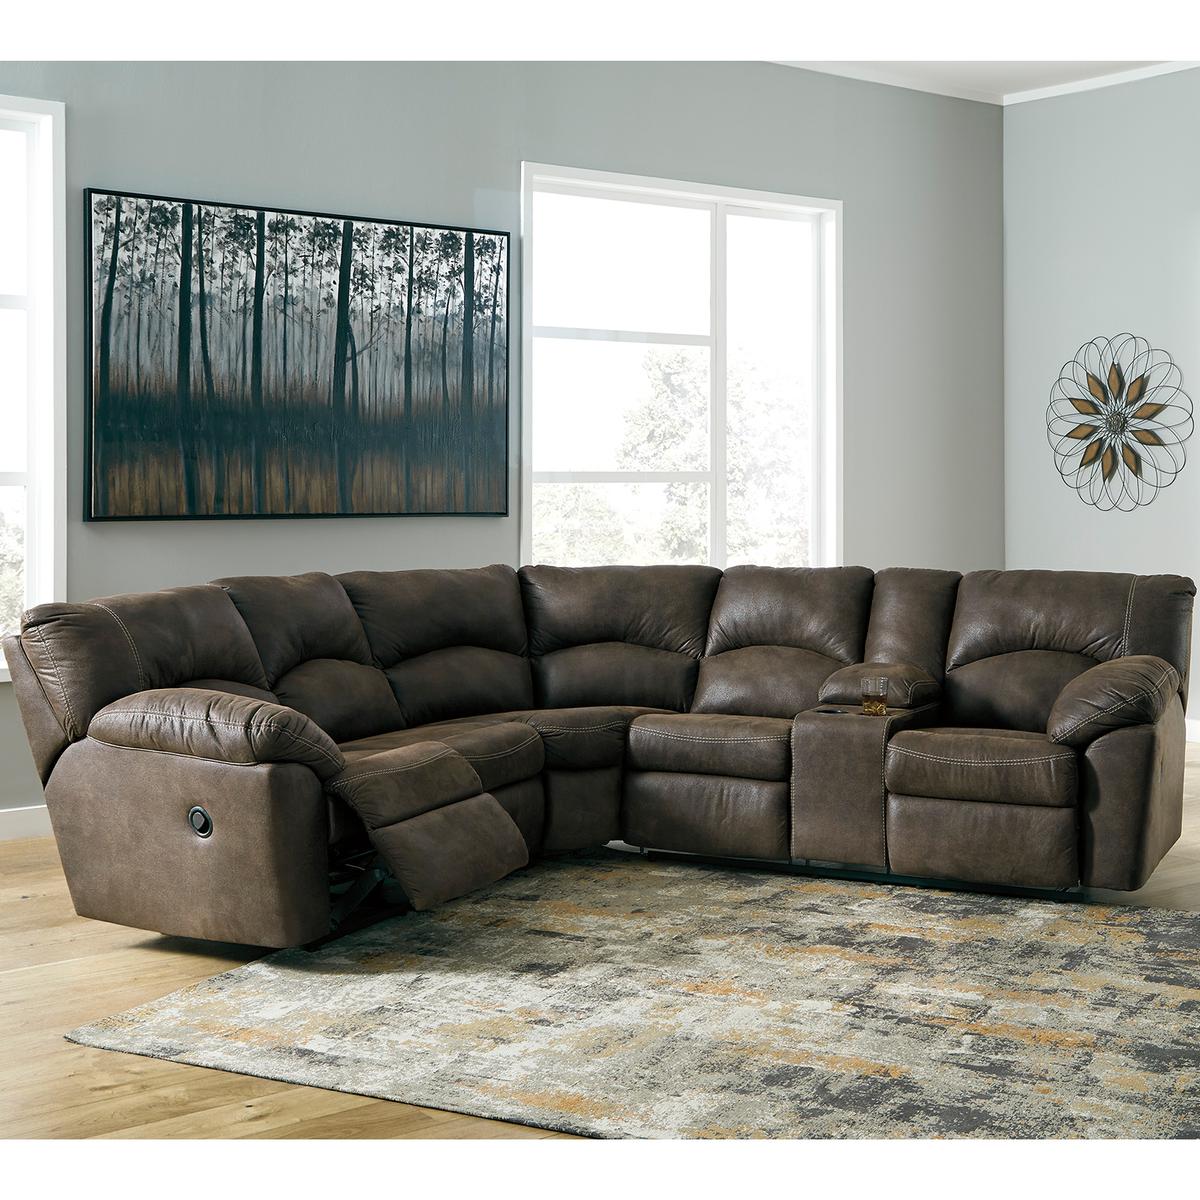 *Ashley Tambo Reclining Sectional Was $1700.00 Now: $1299.99